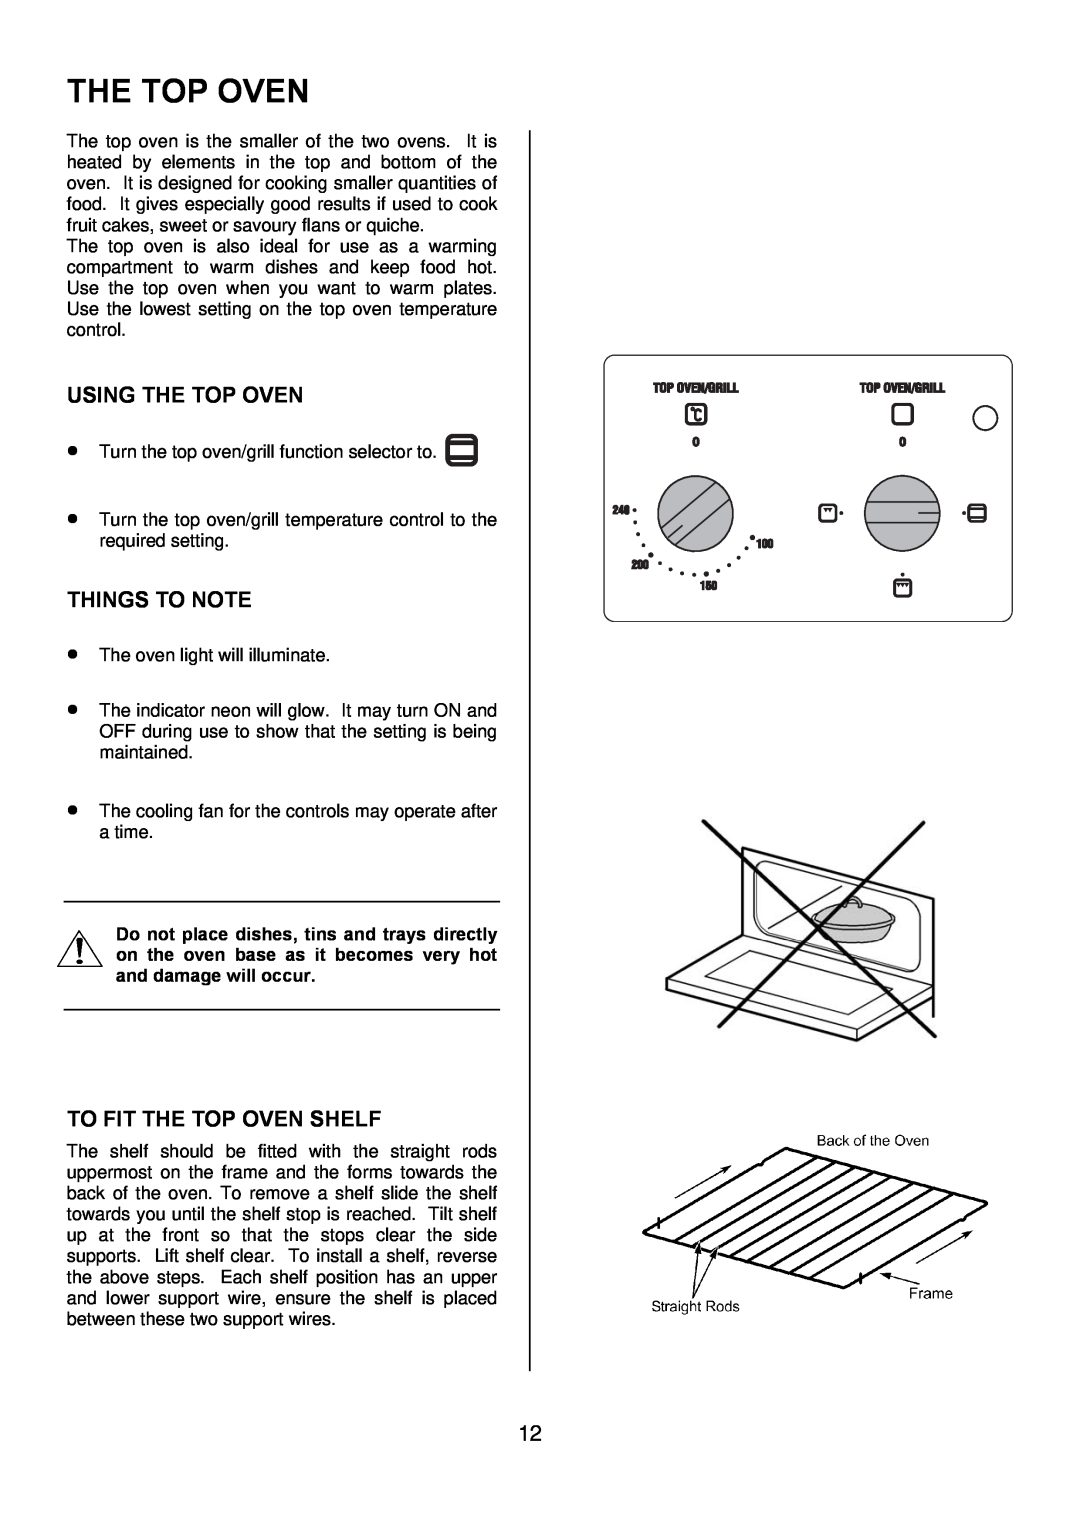 Tricity Bendix TBD950 installation instructions Using The Top Oven, To Fit The Top Oven Shelf, Things To Note 